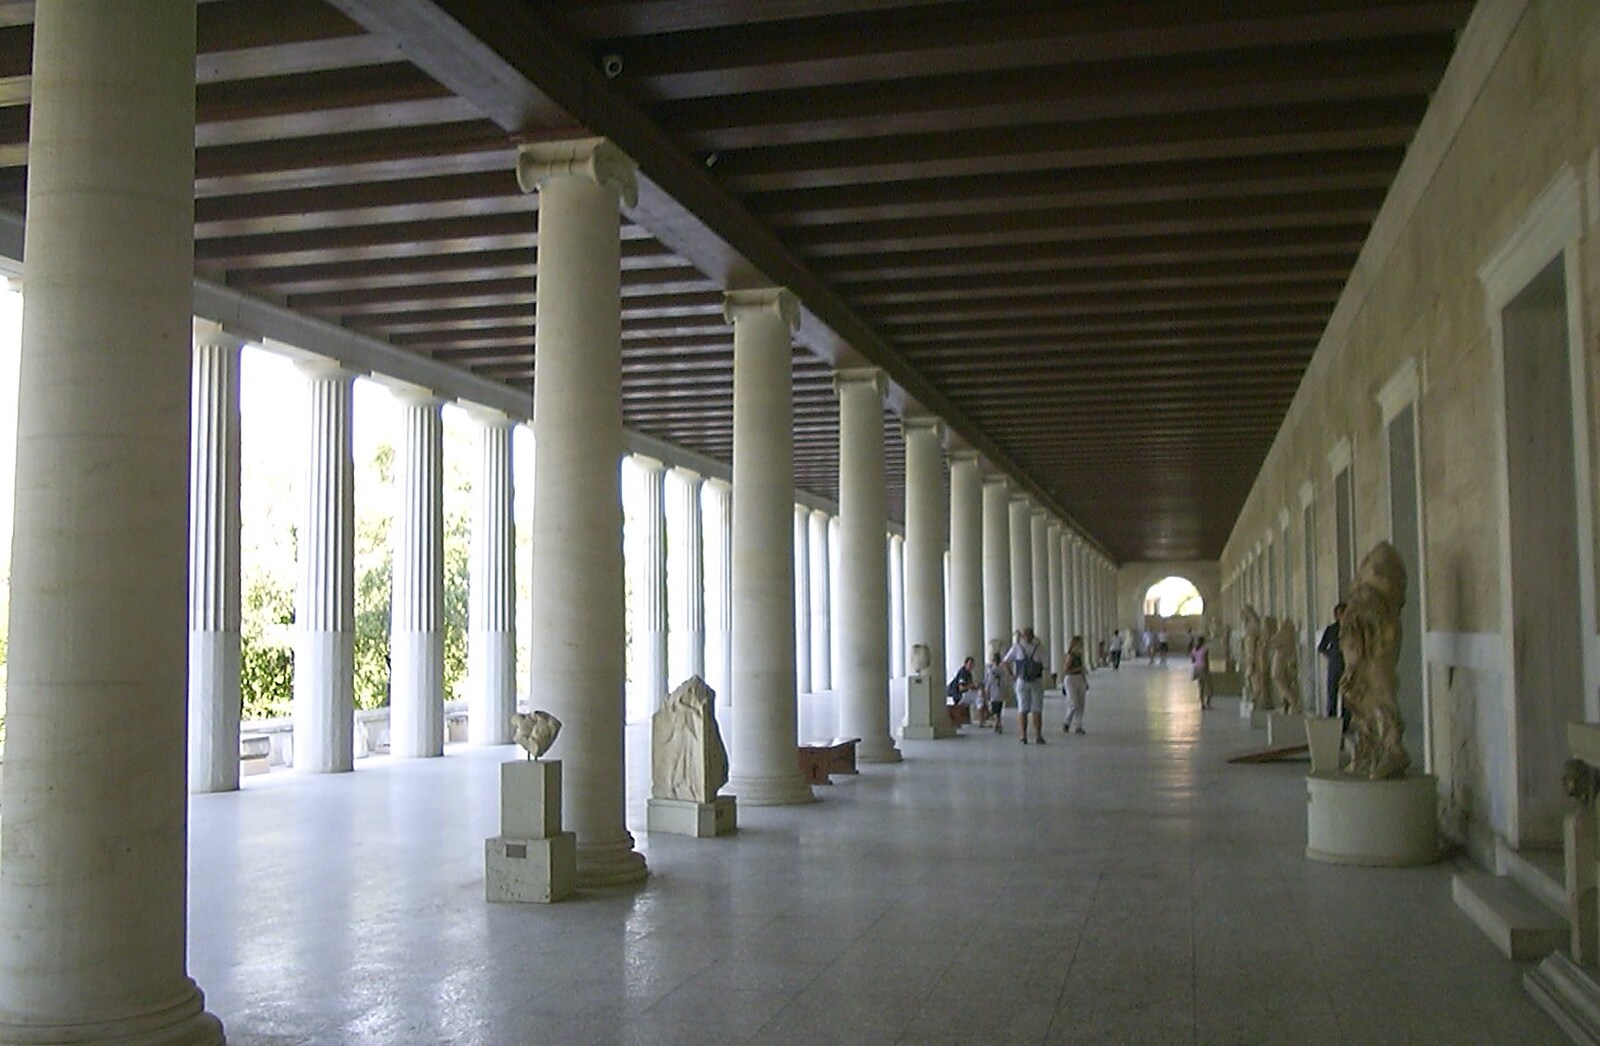 A Postcard From Athens: A Day Trip to the Olympics, Greece - 19th August 2004: The Stoa of Attalos, rebuilt by the American School